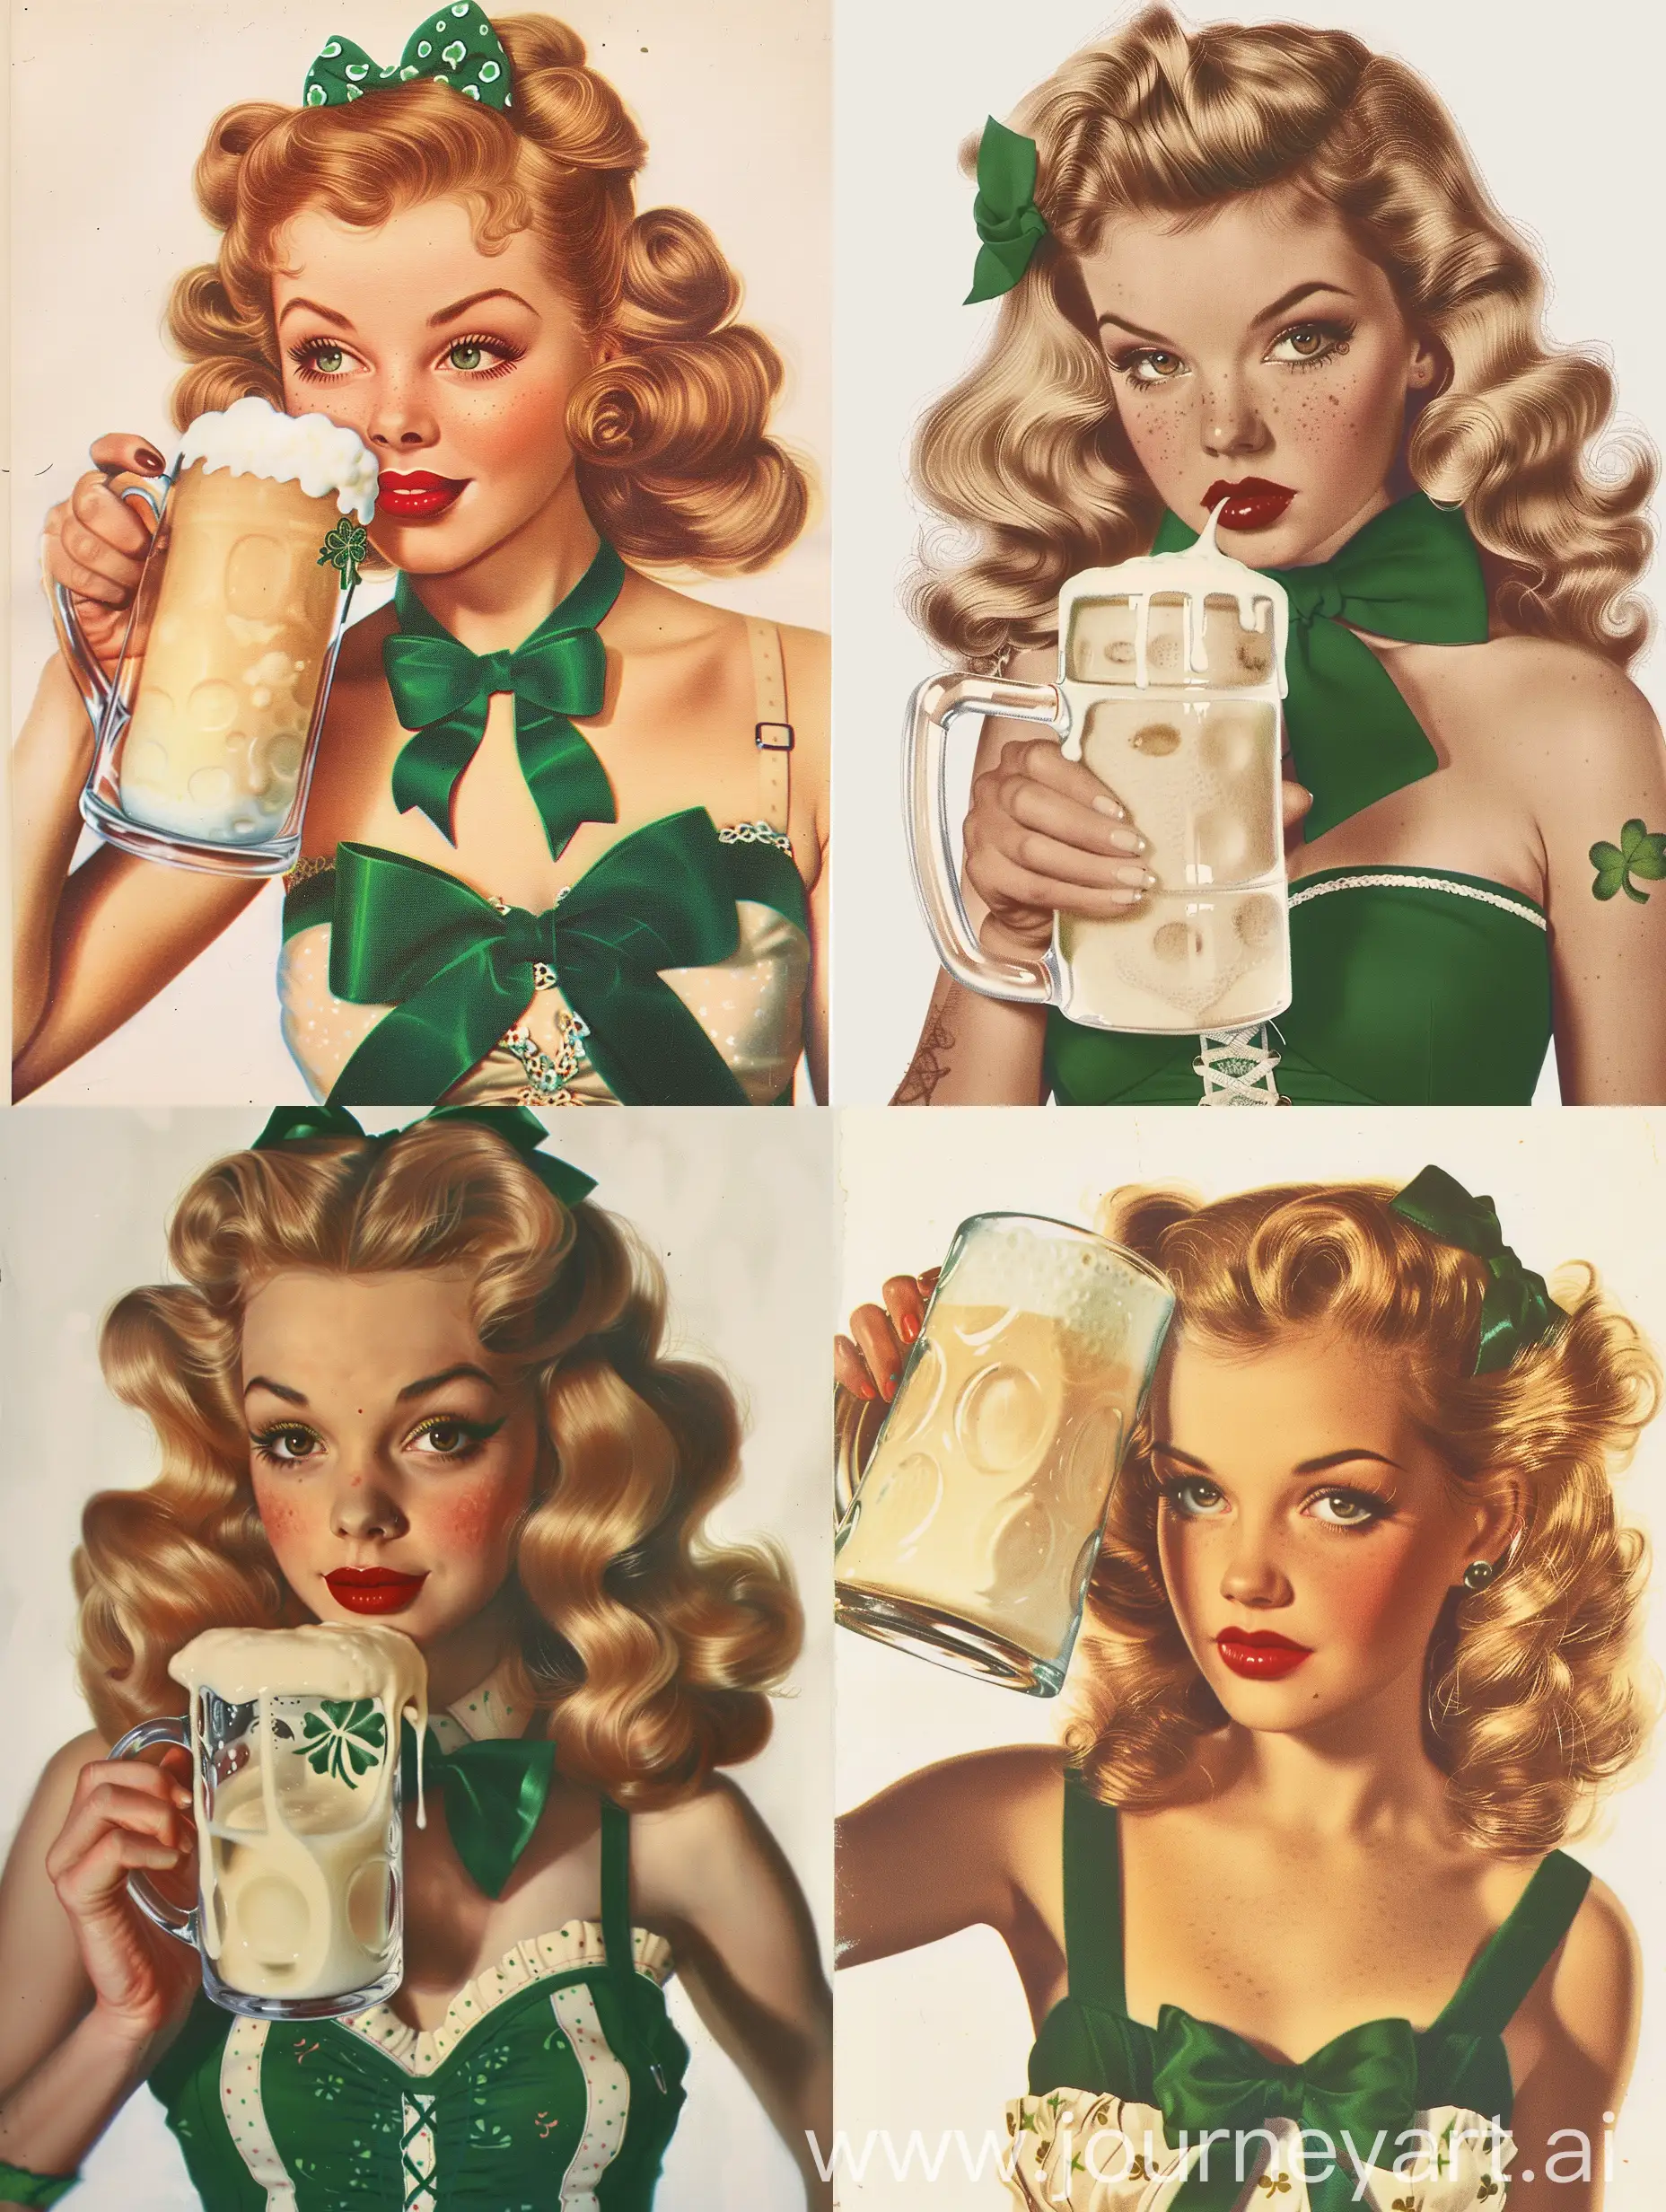 vintage pin-up girl holding frothy beer mug, classic 1950s American style, fair skin, red lips, blonde victory roll curls, green bow, St. Patrick's Day outfit with sweetheart neckline and knot detail, transparent-sided beer mug, plain white background, traditional tattoo art influence, detailed close-up portrait, high resolution, classic illustration, Norman Rockwell, Gil Elvgren, retro pin-up, soft lighting, warm tones, vintage camera filters, shallow depth of field, medium format lens, bokeh, vintage grain, 1950s color palette.